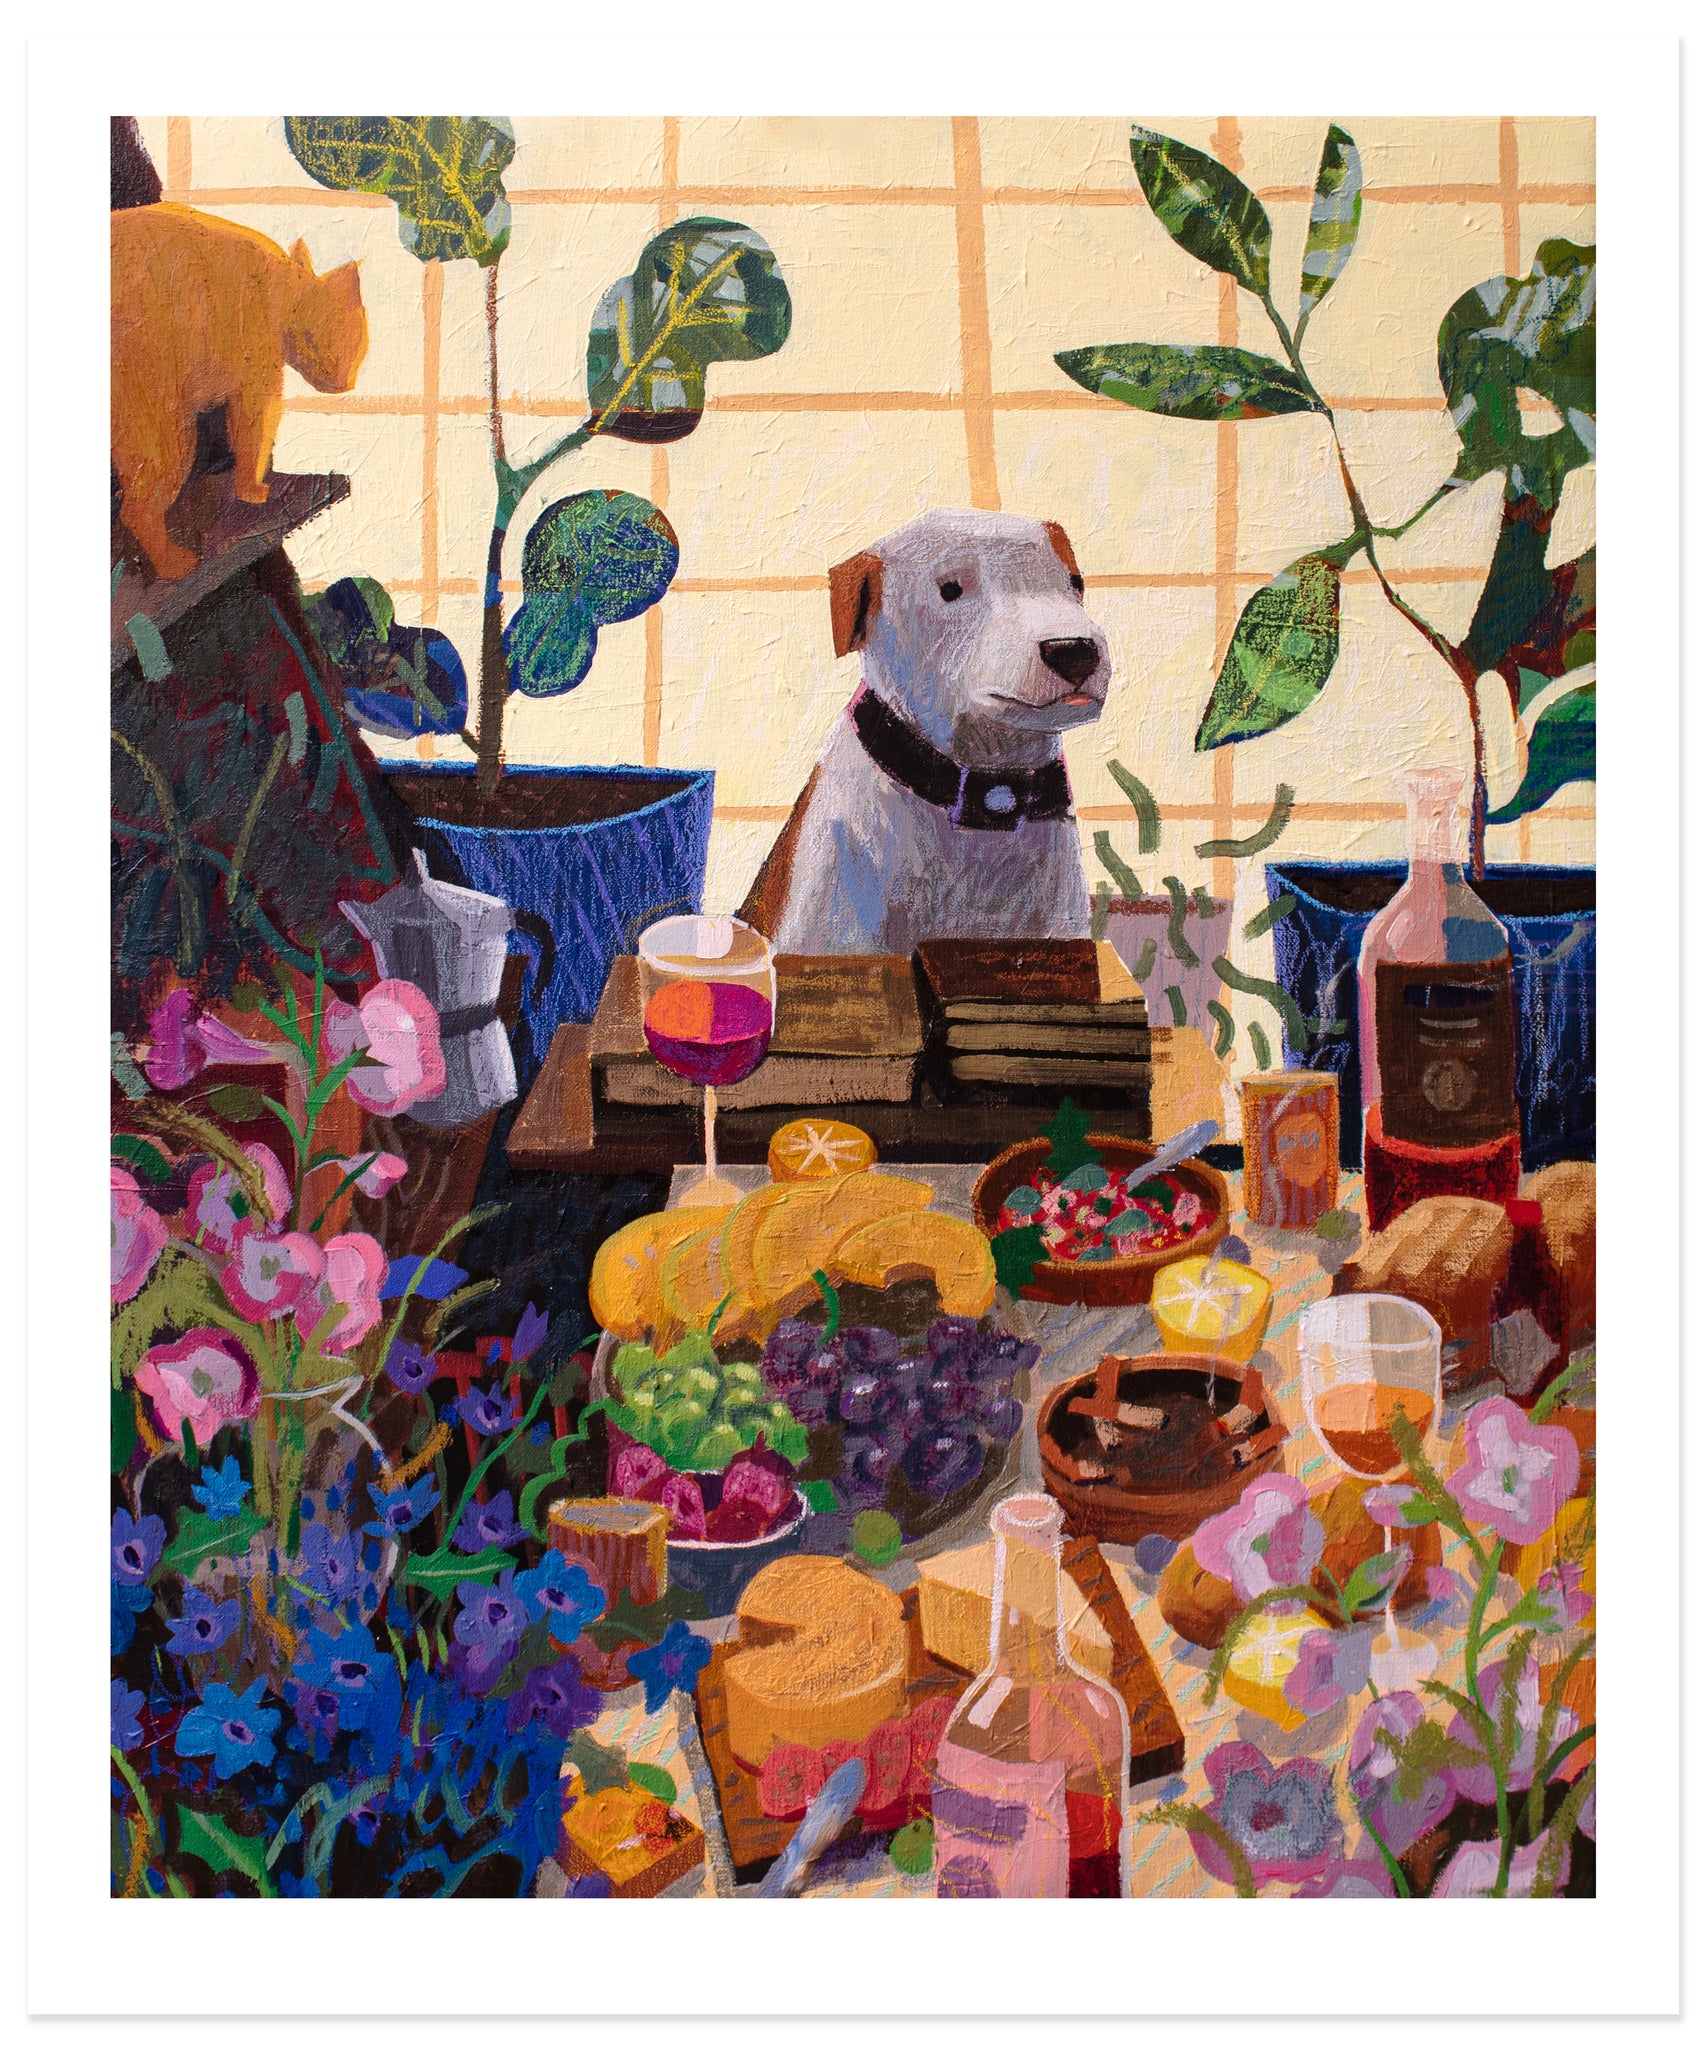 Nicholas Bono Kennedy - "Maybe I Can Have Some?" print